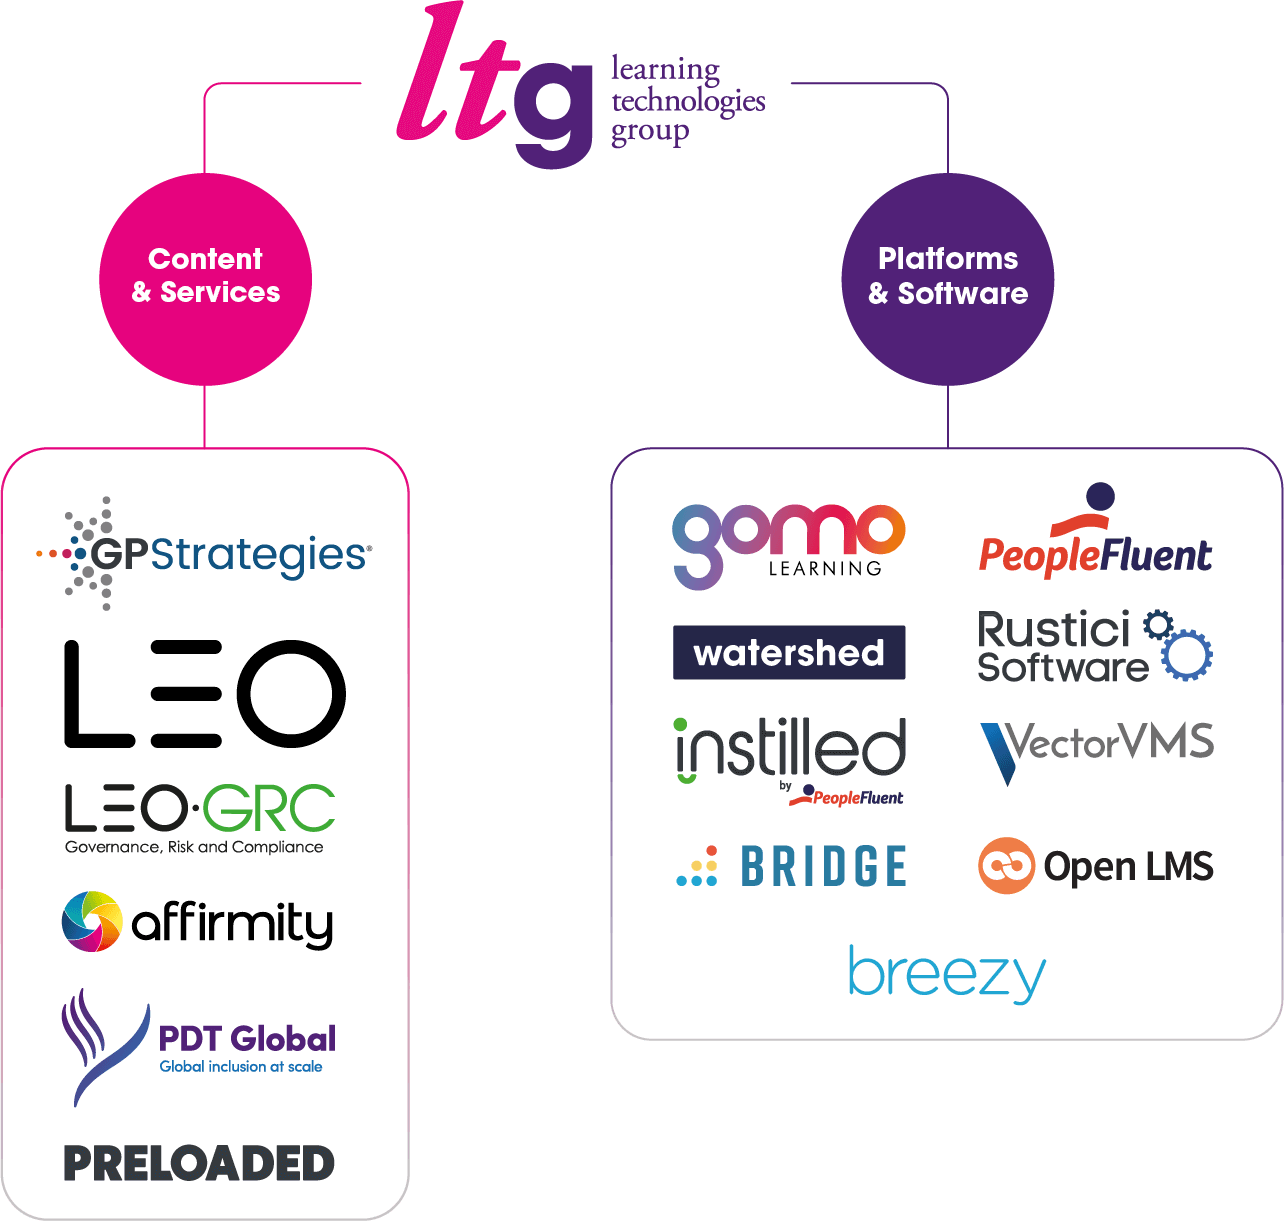 A list of all the companies in the LTG portfolio, divided into Content & Services and Platforms & Software businesses